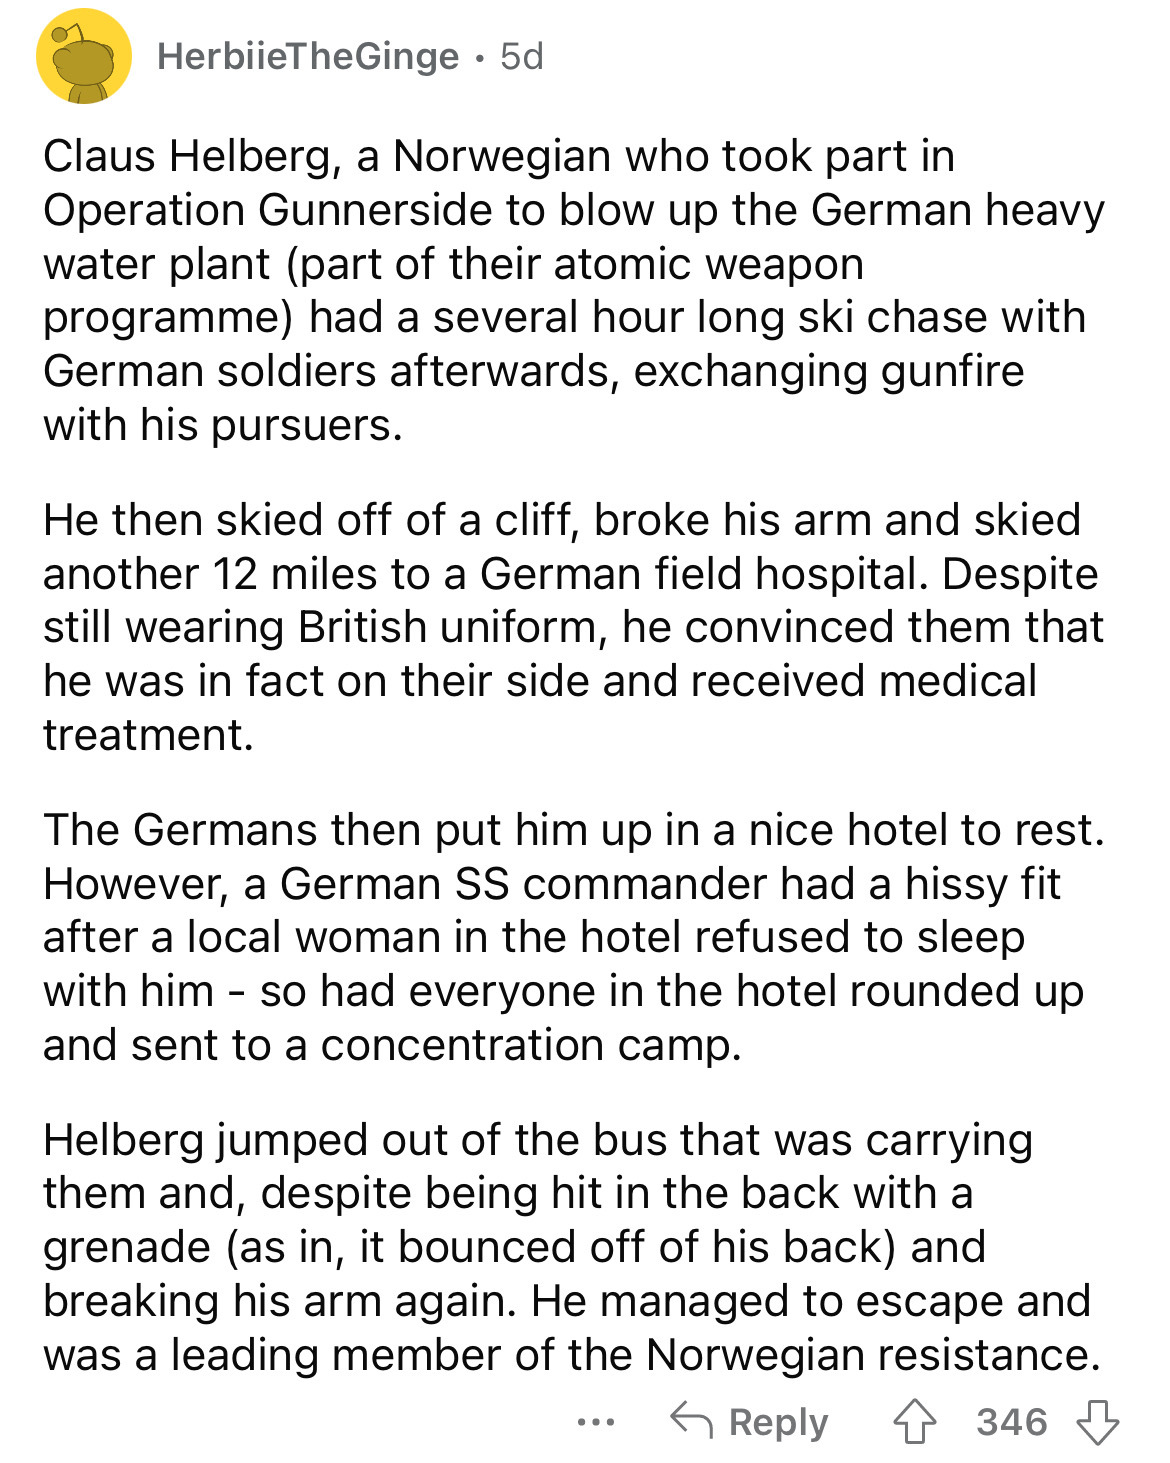 document - HerbiieTheGinge. 5d Claus Helberg, a Norwegian who took part in Operation Gunnerside to blow up the German heavy water plant part of their atomic weapon programme had a several hour long ski chase with German soldiers afterwards, exchanging gun